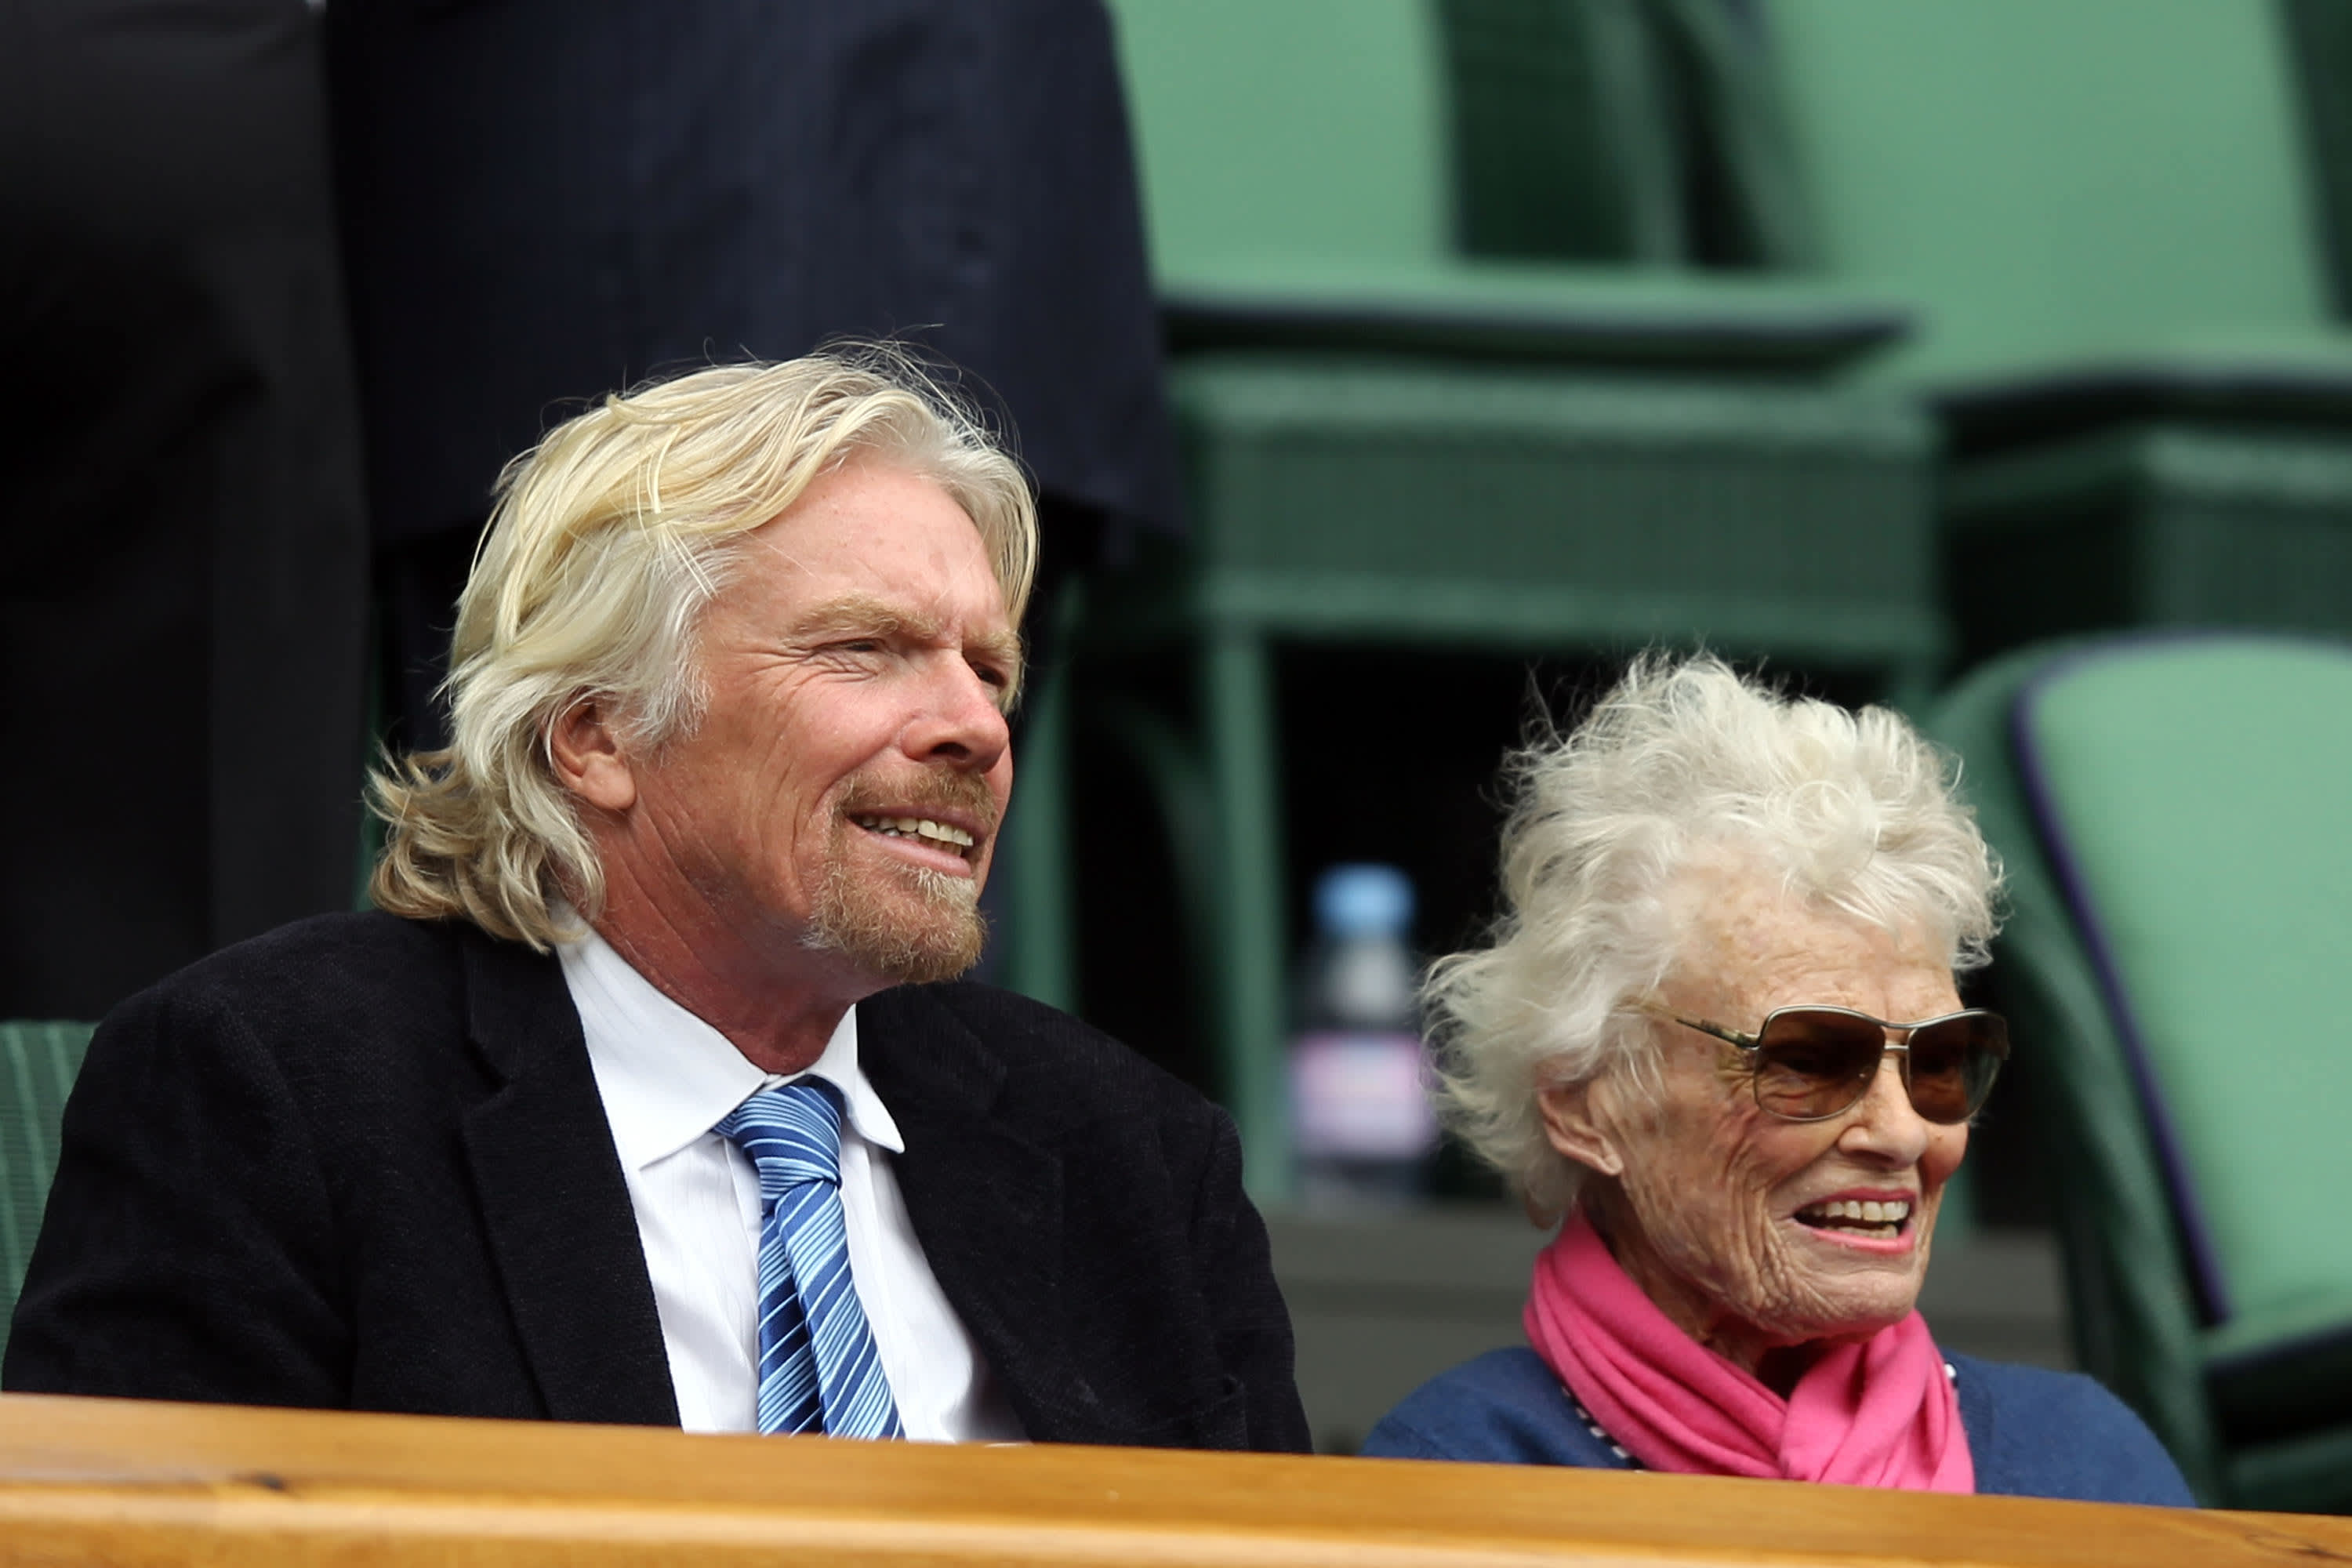 Richard Branson reveals that his mother died at Covid